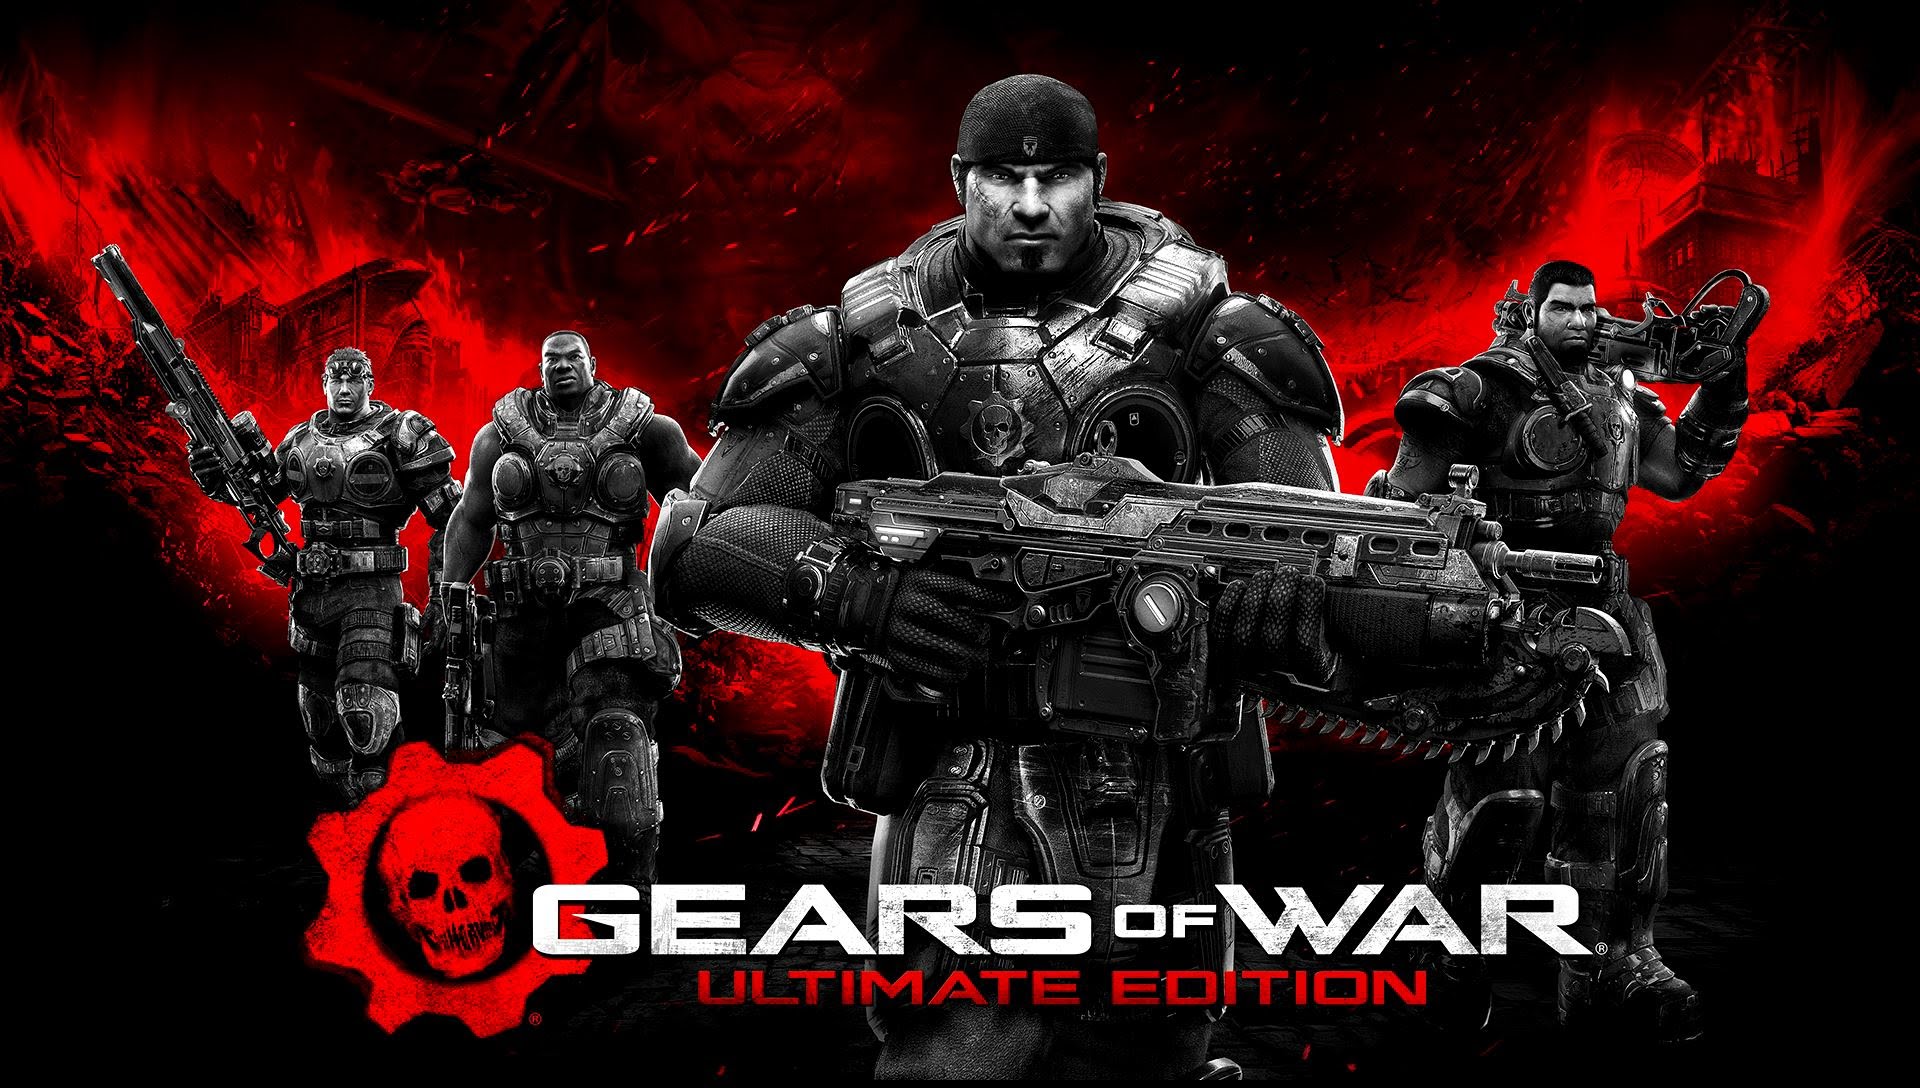 Gears of War Ultimate Edition PC Requirements Revealed